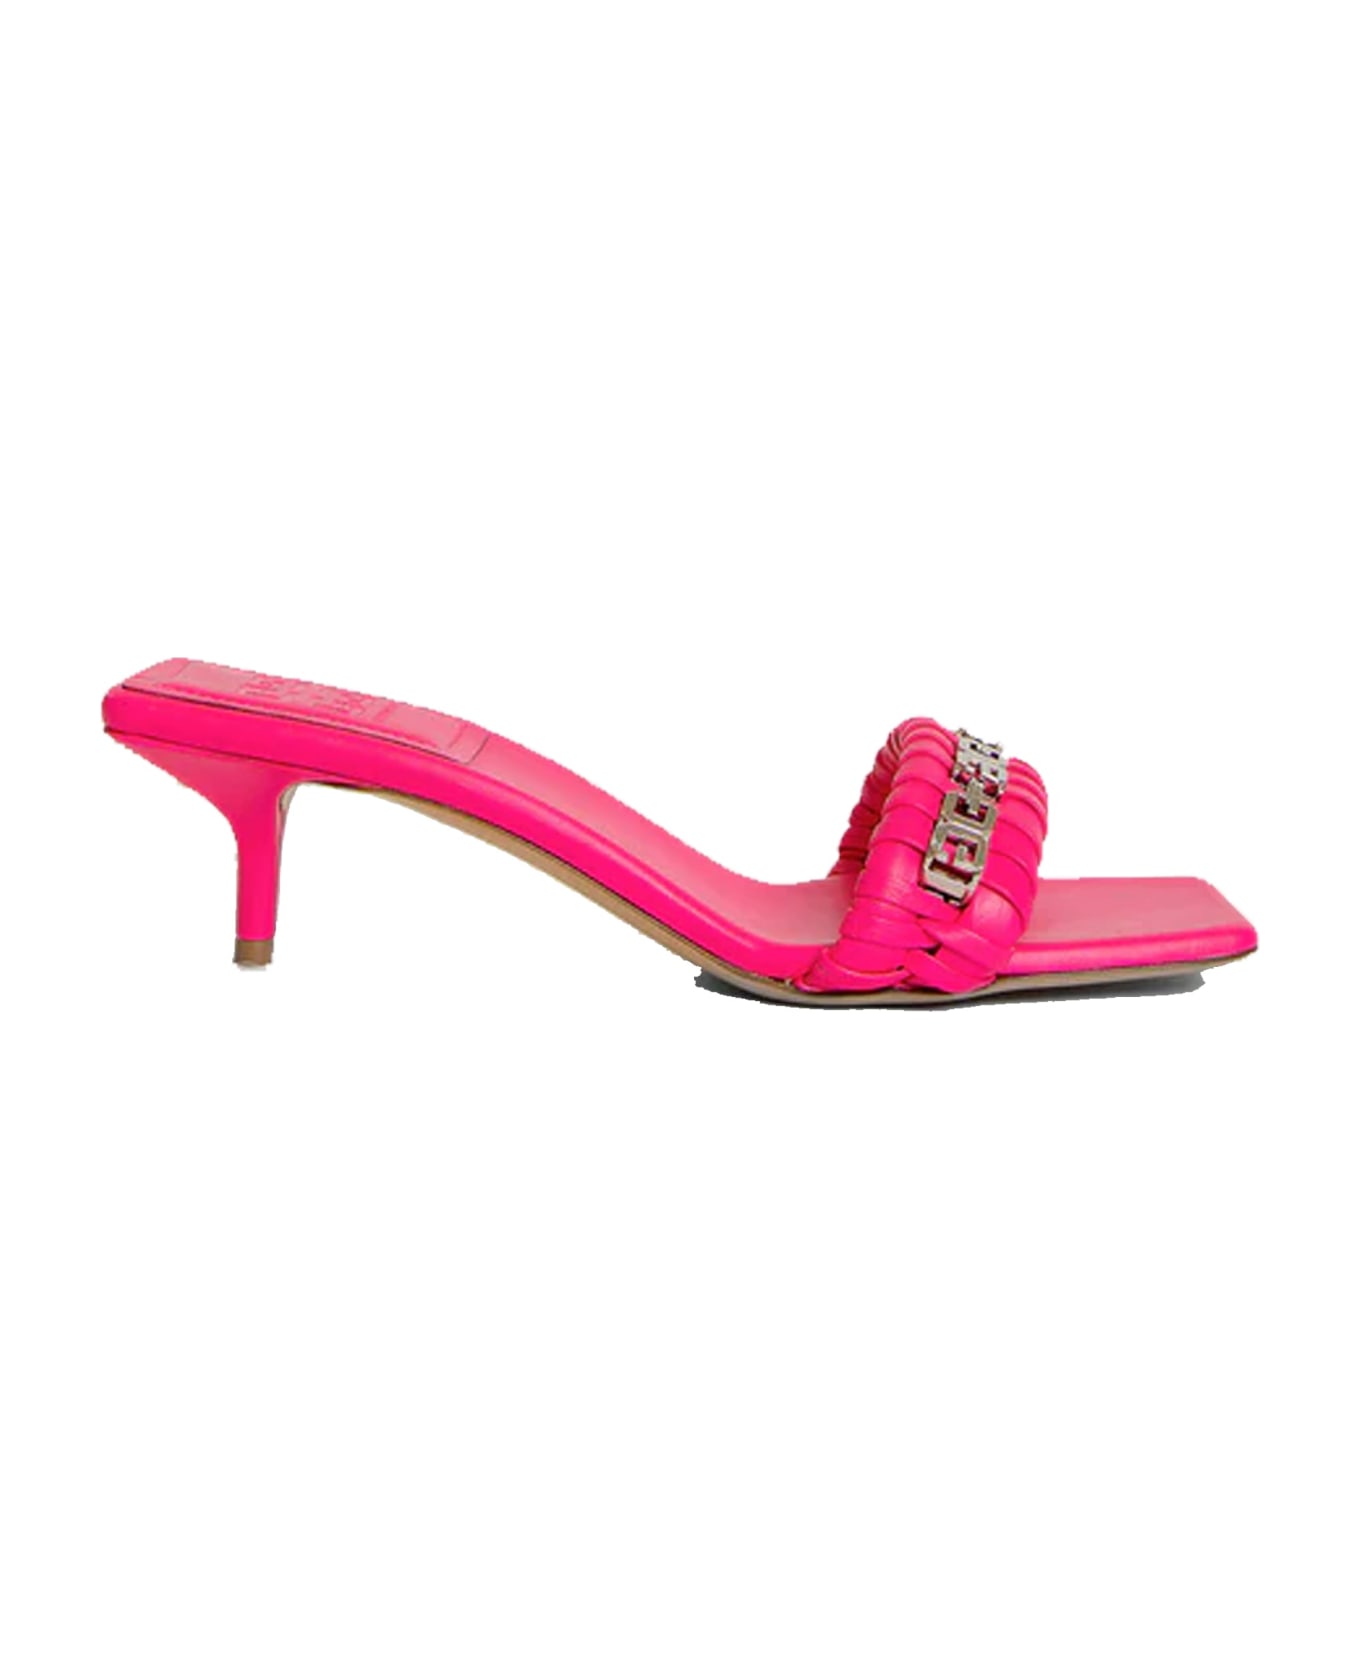 Givenchy Leather Sandals - Pink